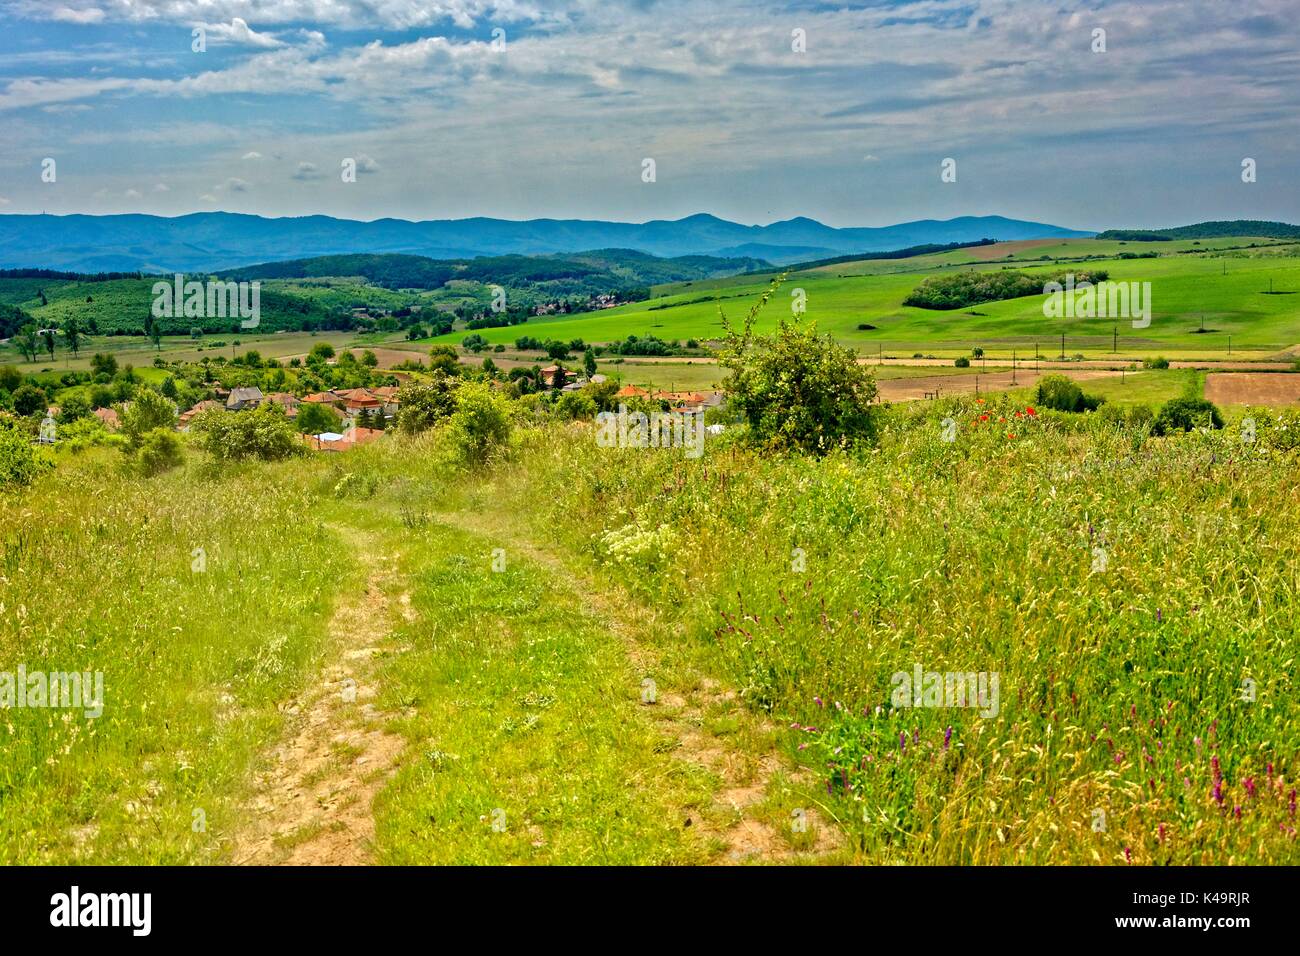 Landscape With Country Road And Community Stock Photo